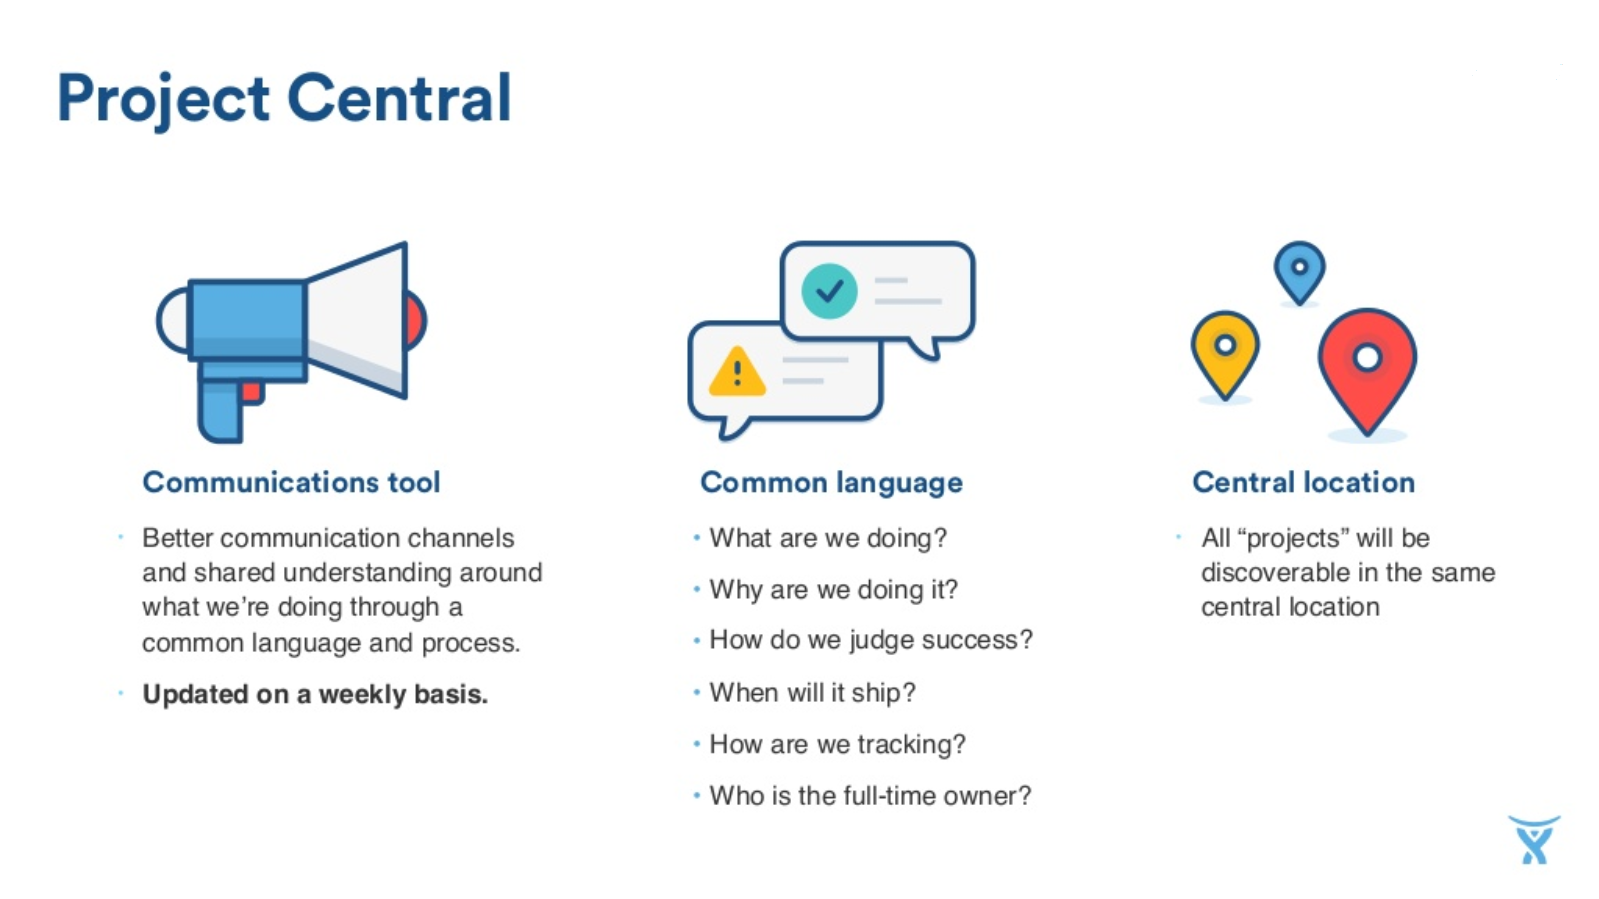 Atlassian's project central allows better communication